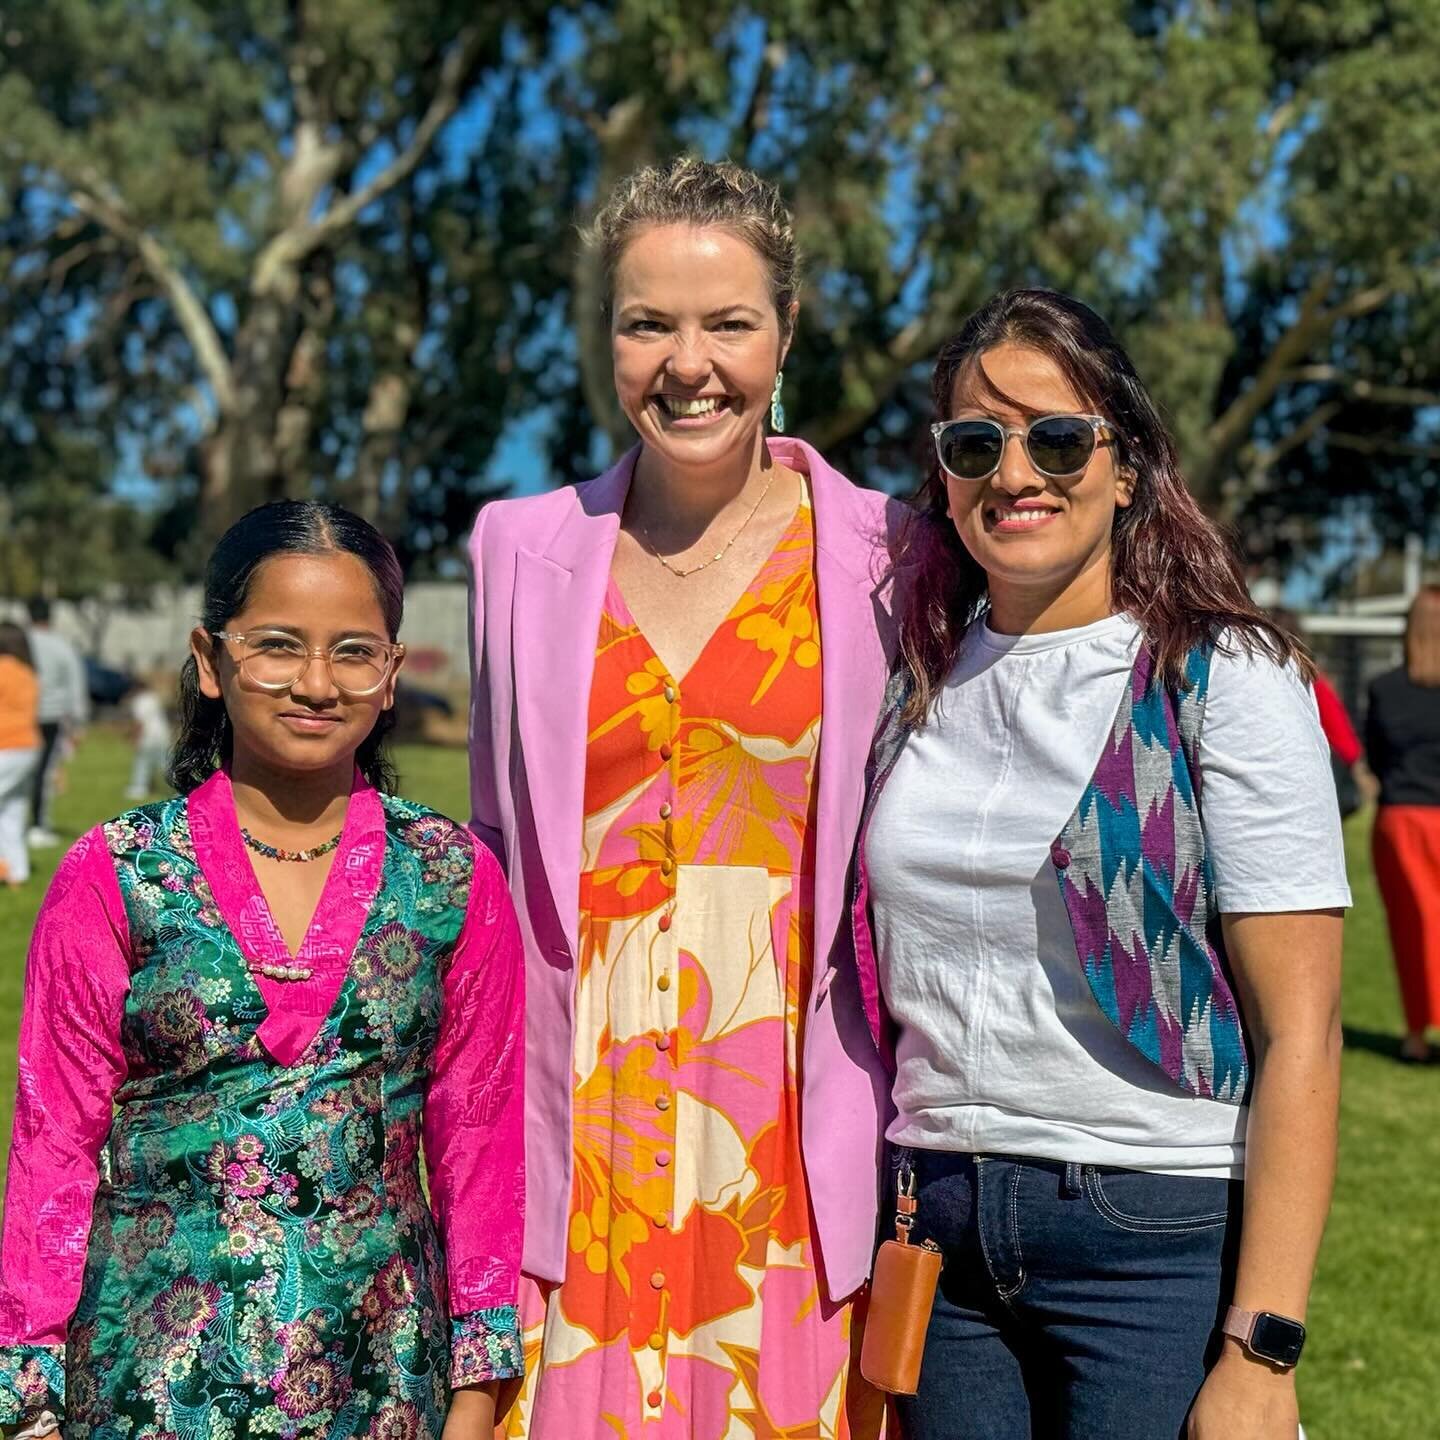 So much joy at St Bernadette&rsquo;s School Harmony Day assembly and parade today 🥰